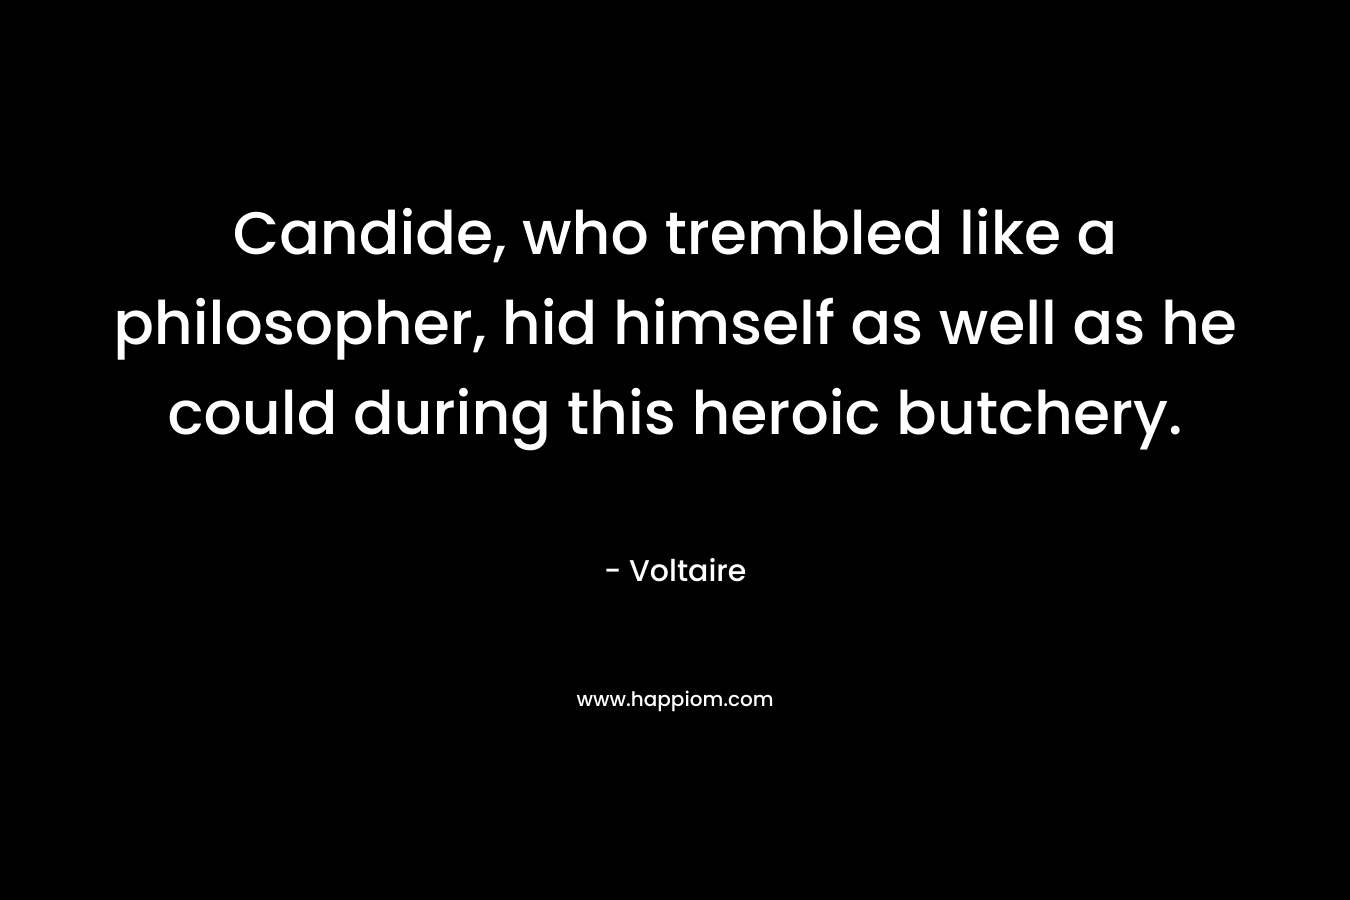 Candide, who trembled like a philosopher, hid himself as well as he could during this heroic butchery. – Voltaire